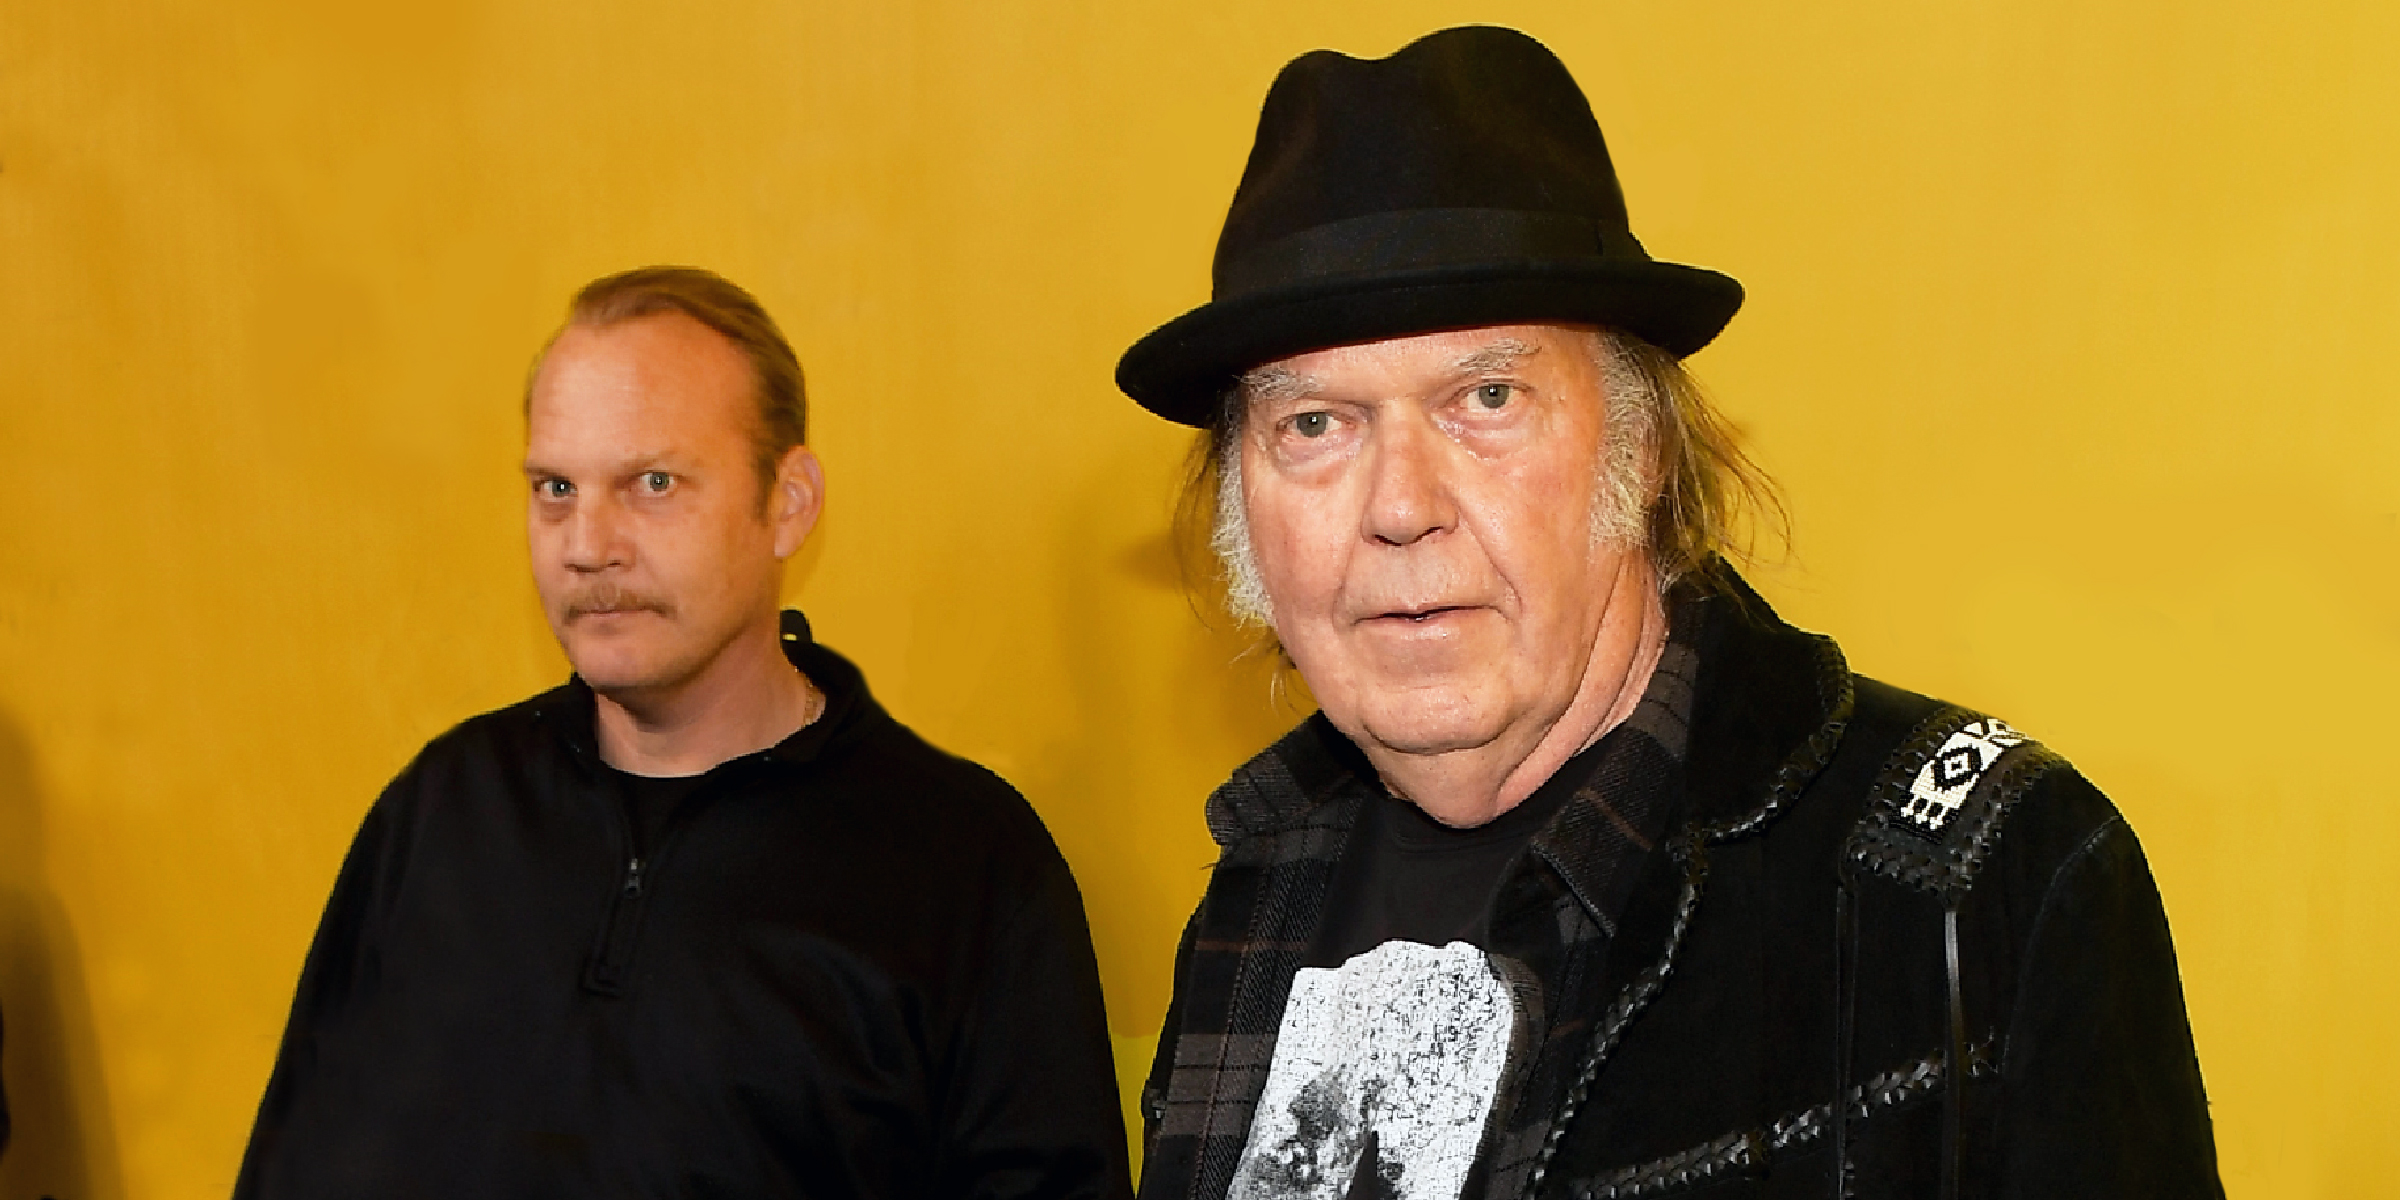 Zeke Young and Neil Young | Source: Getty Images